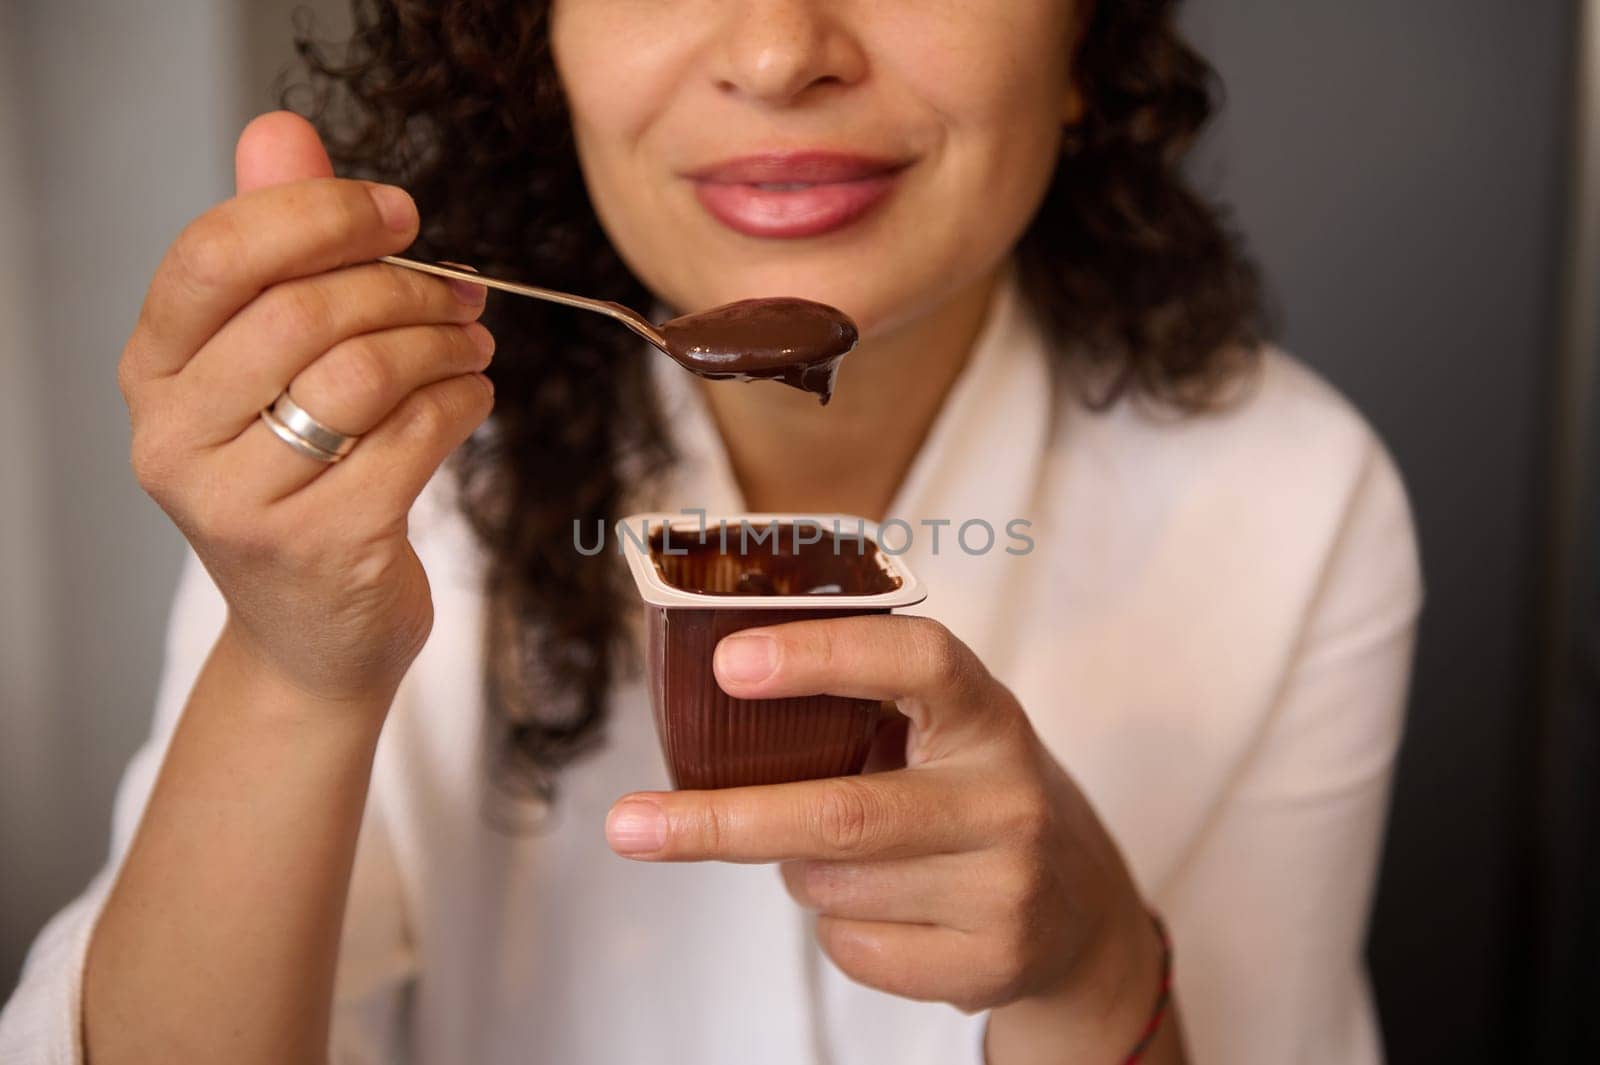 Close-up of a blurred young smiling woman eating delicious chocolate vegan yogurt for breakfast. Healthy eating and diet concept. Food and drink consumerism. People and lifestyle